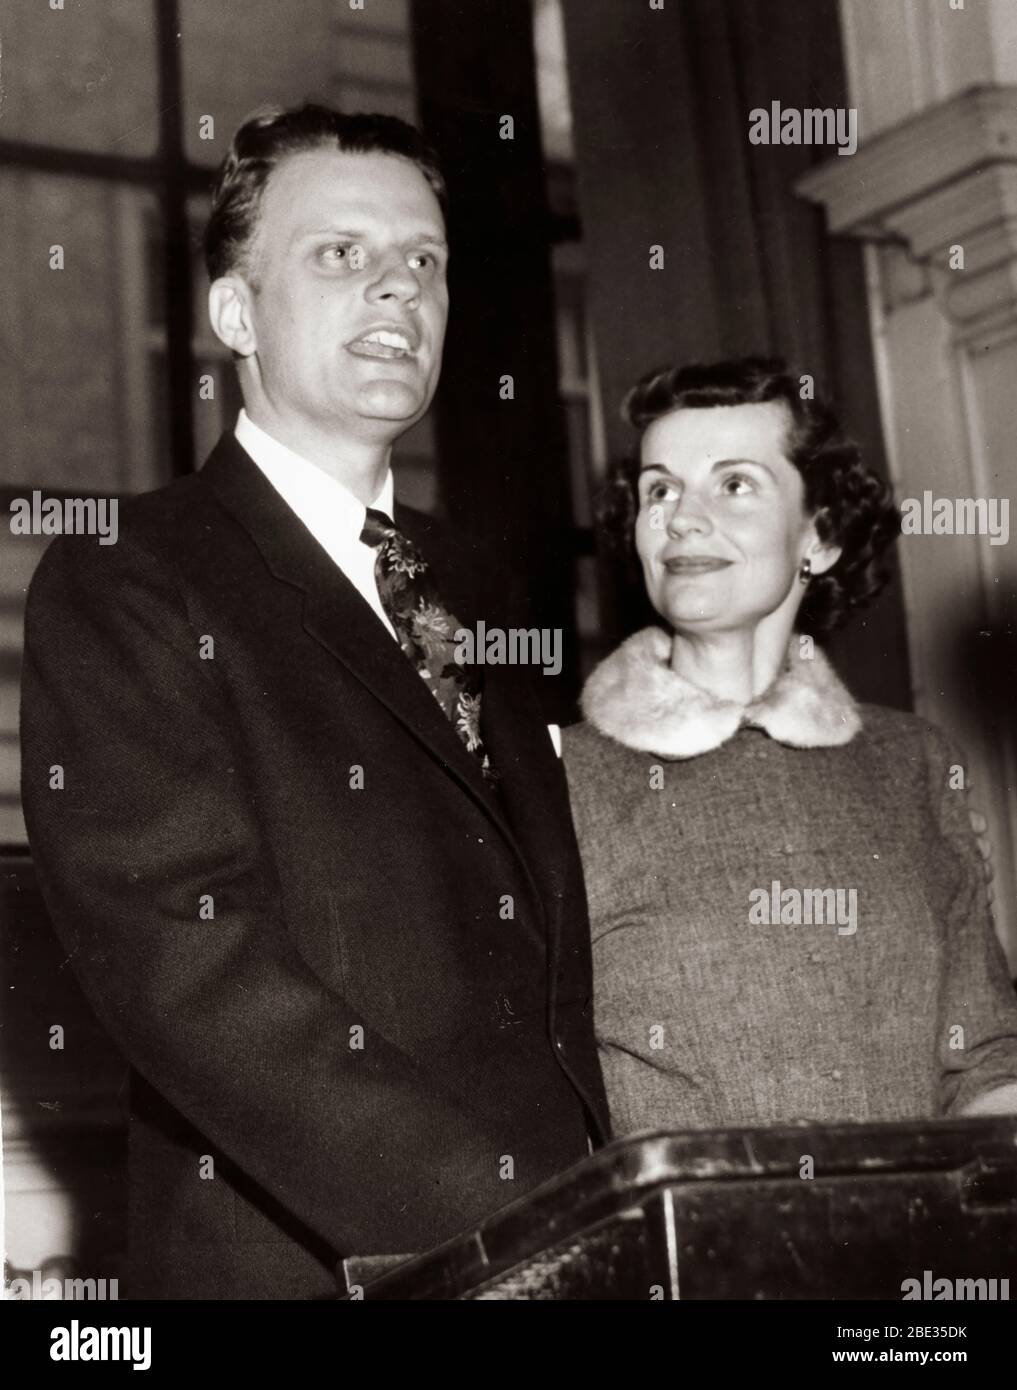 Oct. 2, 1960 - London, England, U.K. - BILLY GRAHAM, born William Franklin Graham, Jr. on November 7, 1918, is an evangelical Christian reverend.  He gained celebrity status by broadcasting his sermons on radio and television. PICTURED: Reverend Billy Graham with wife RUTH GRAHAM. Stock Photo